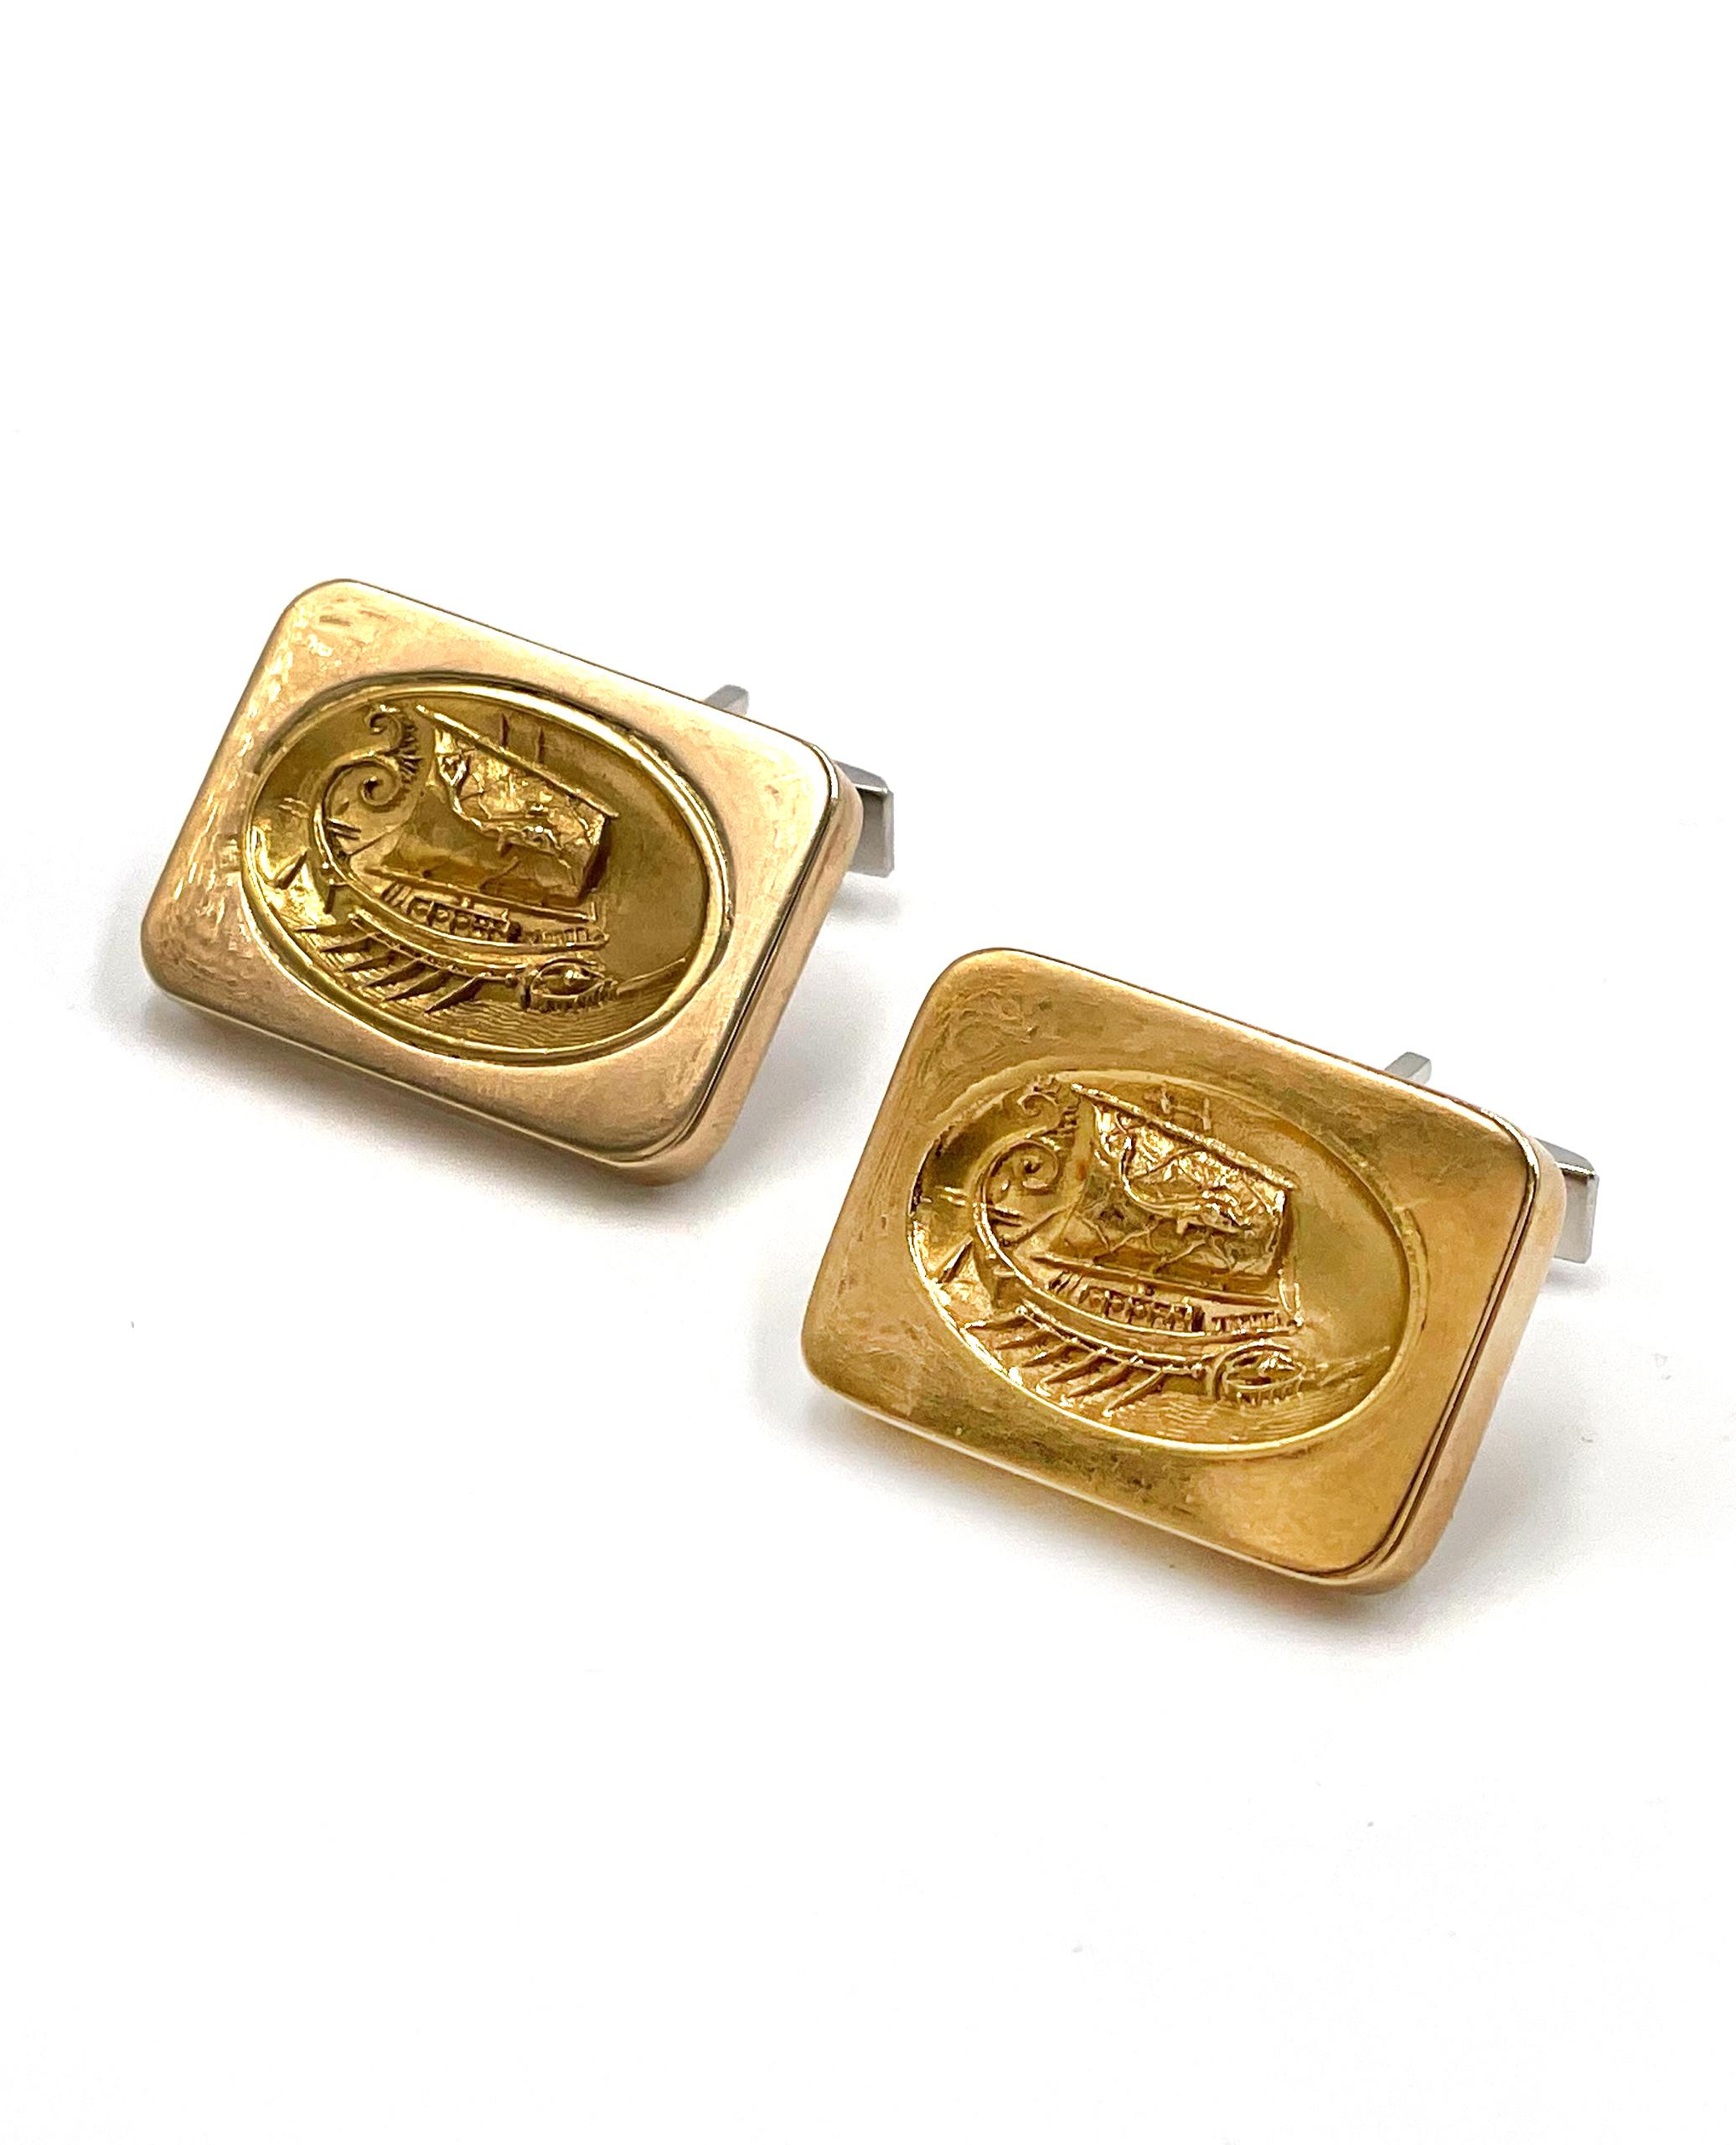 Preowned pair of 14K yellow gold cufflinks with high karat gold inset. The oblong shaped links measure
26.0x18.3mm. The centers are inset with a concave oval with a raised Viking motif.